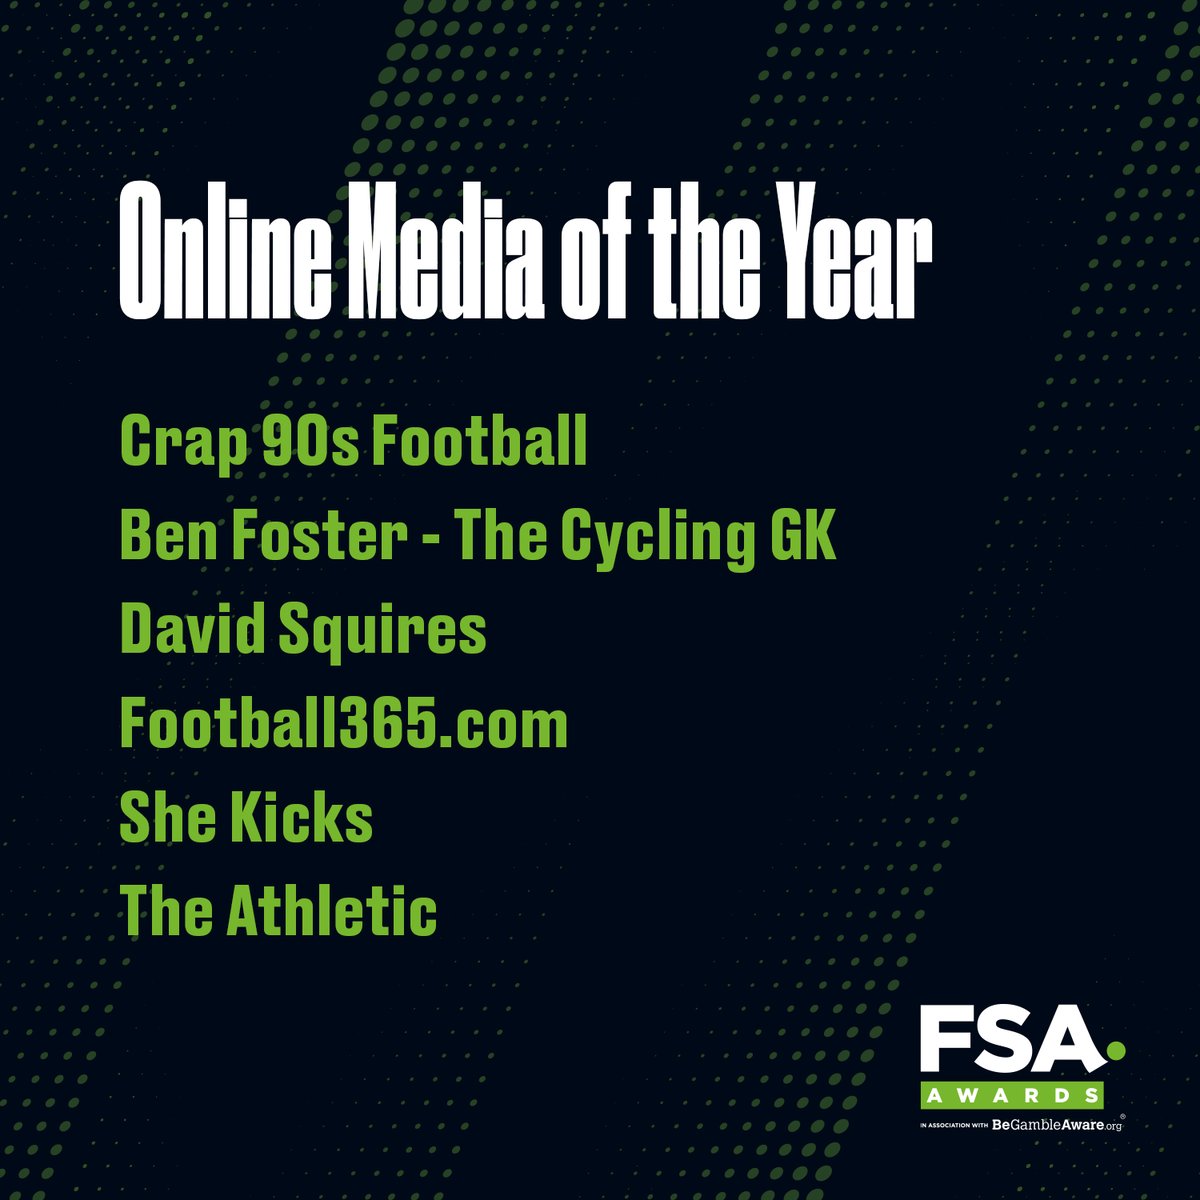 You've probably spent part of your lunchbreak on one of these - the best of football's rich online media. @Crap90sFootball @BenFoster @squires_david @F365 @SheKicksMag @TheAthleticFC Back your favourite in our awards vote before it's too late: thefsa.org.uk/news/fsa-award…